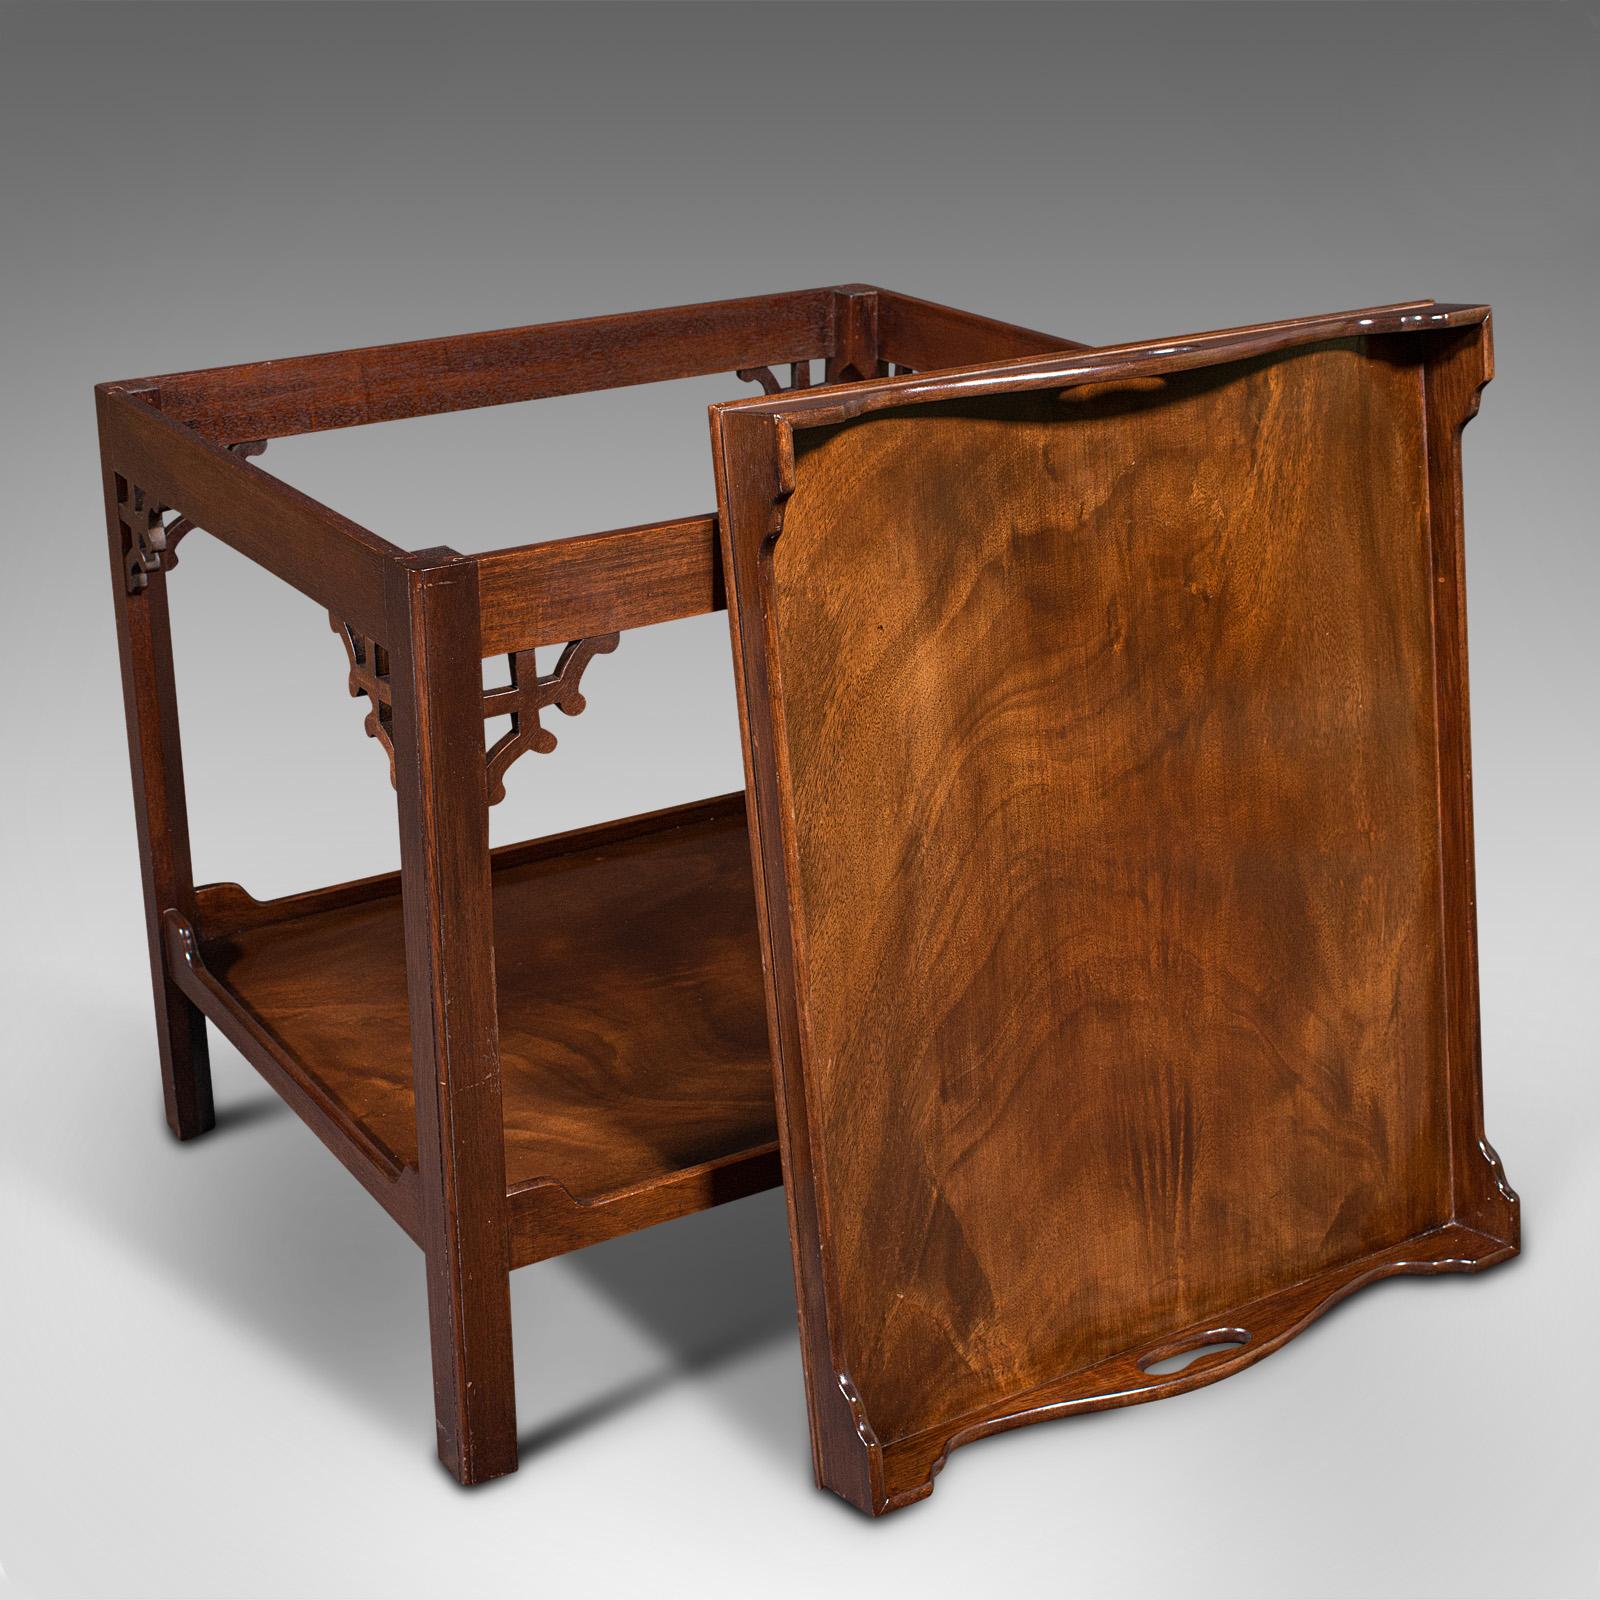 This is a quality vintage serving tray table. An English, mahogany afternoon tea or drink's stand in the Chippendale manner, dating to the late 20th century, circa 1970.

Appreciable late 20th century quality with Chippendale influence
Displays a